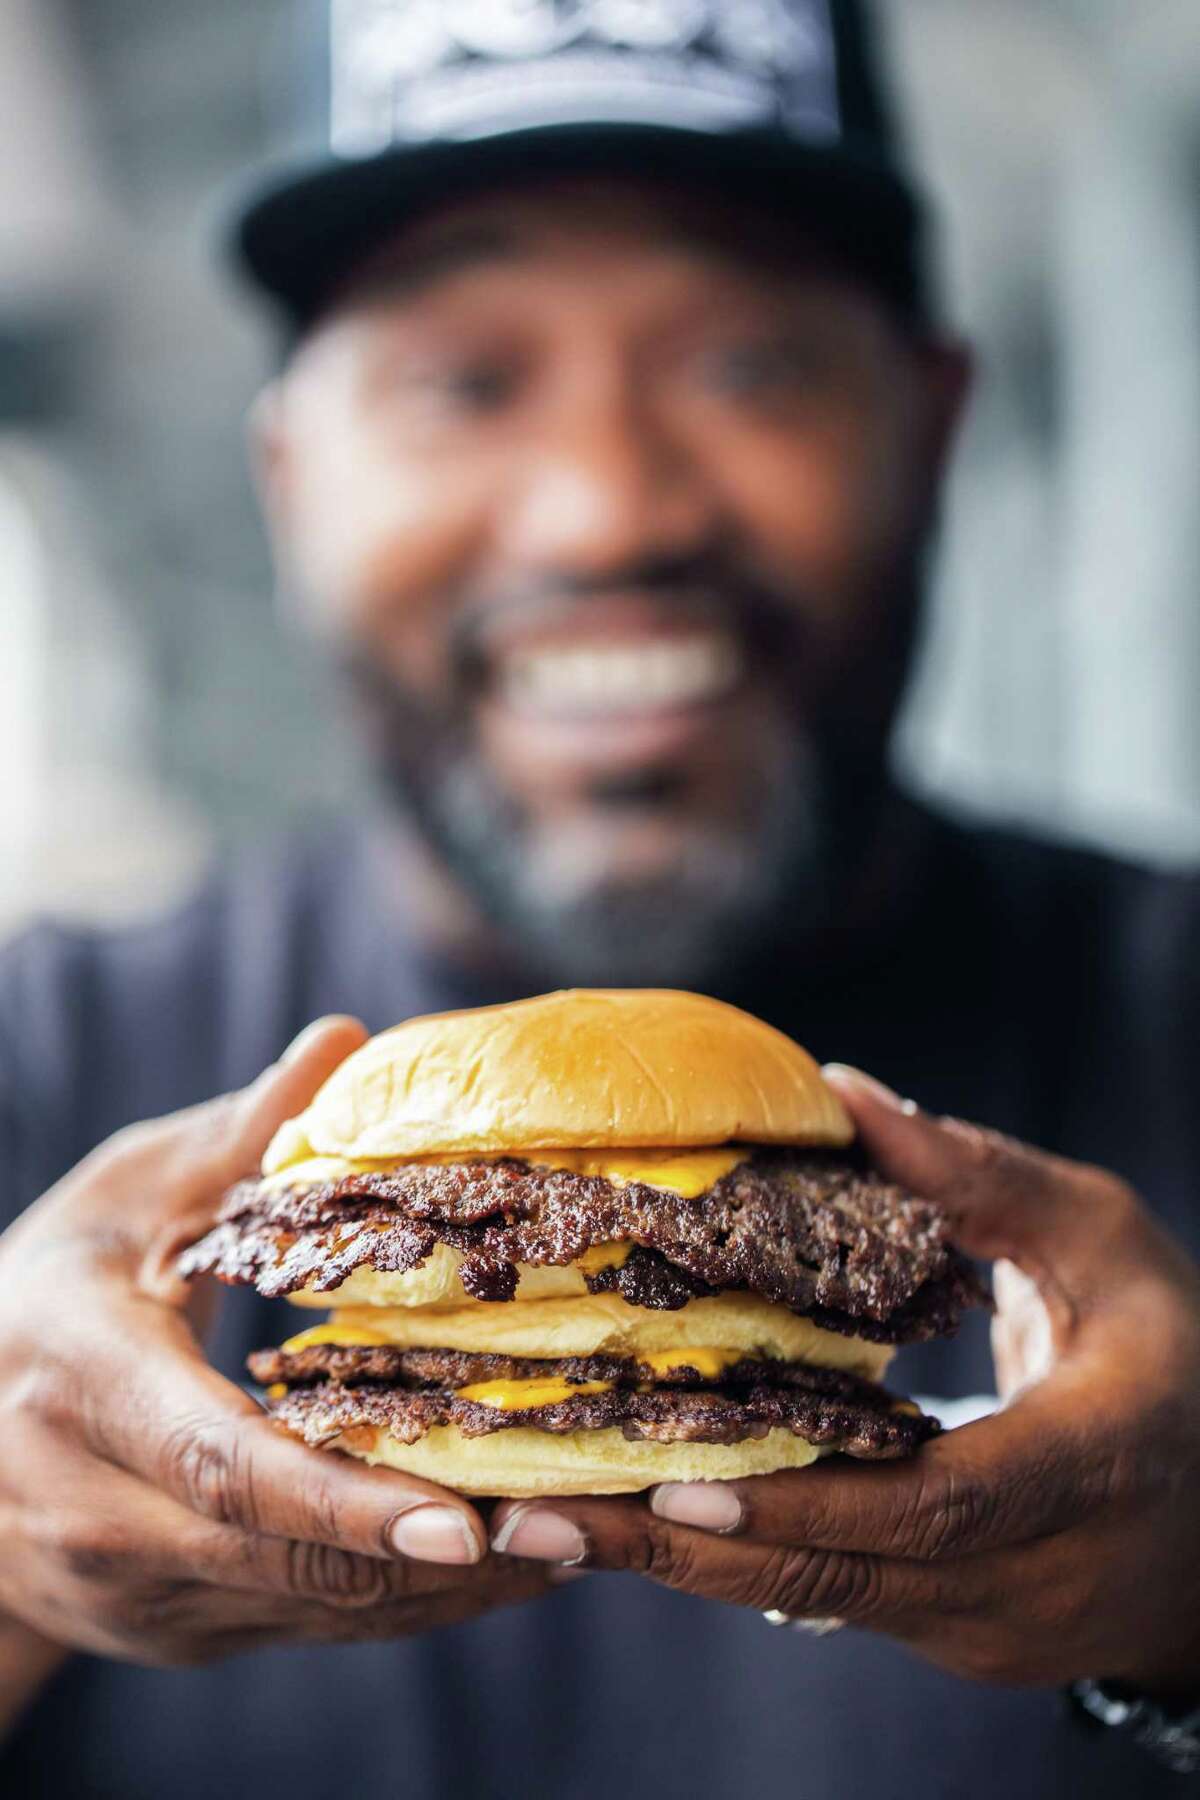 Trill Burgers is a new smash burger concept headed by Houston rap artist Bun B. The double-patty smash burger has been served at several Houston pop-ups as it looks for a brick-and-mortar location.